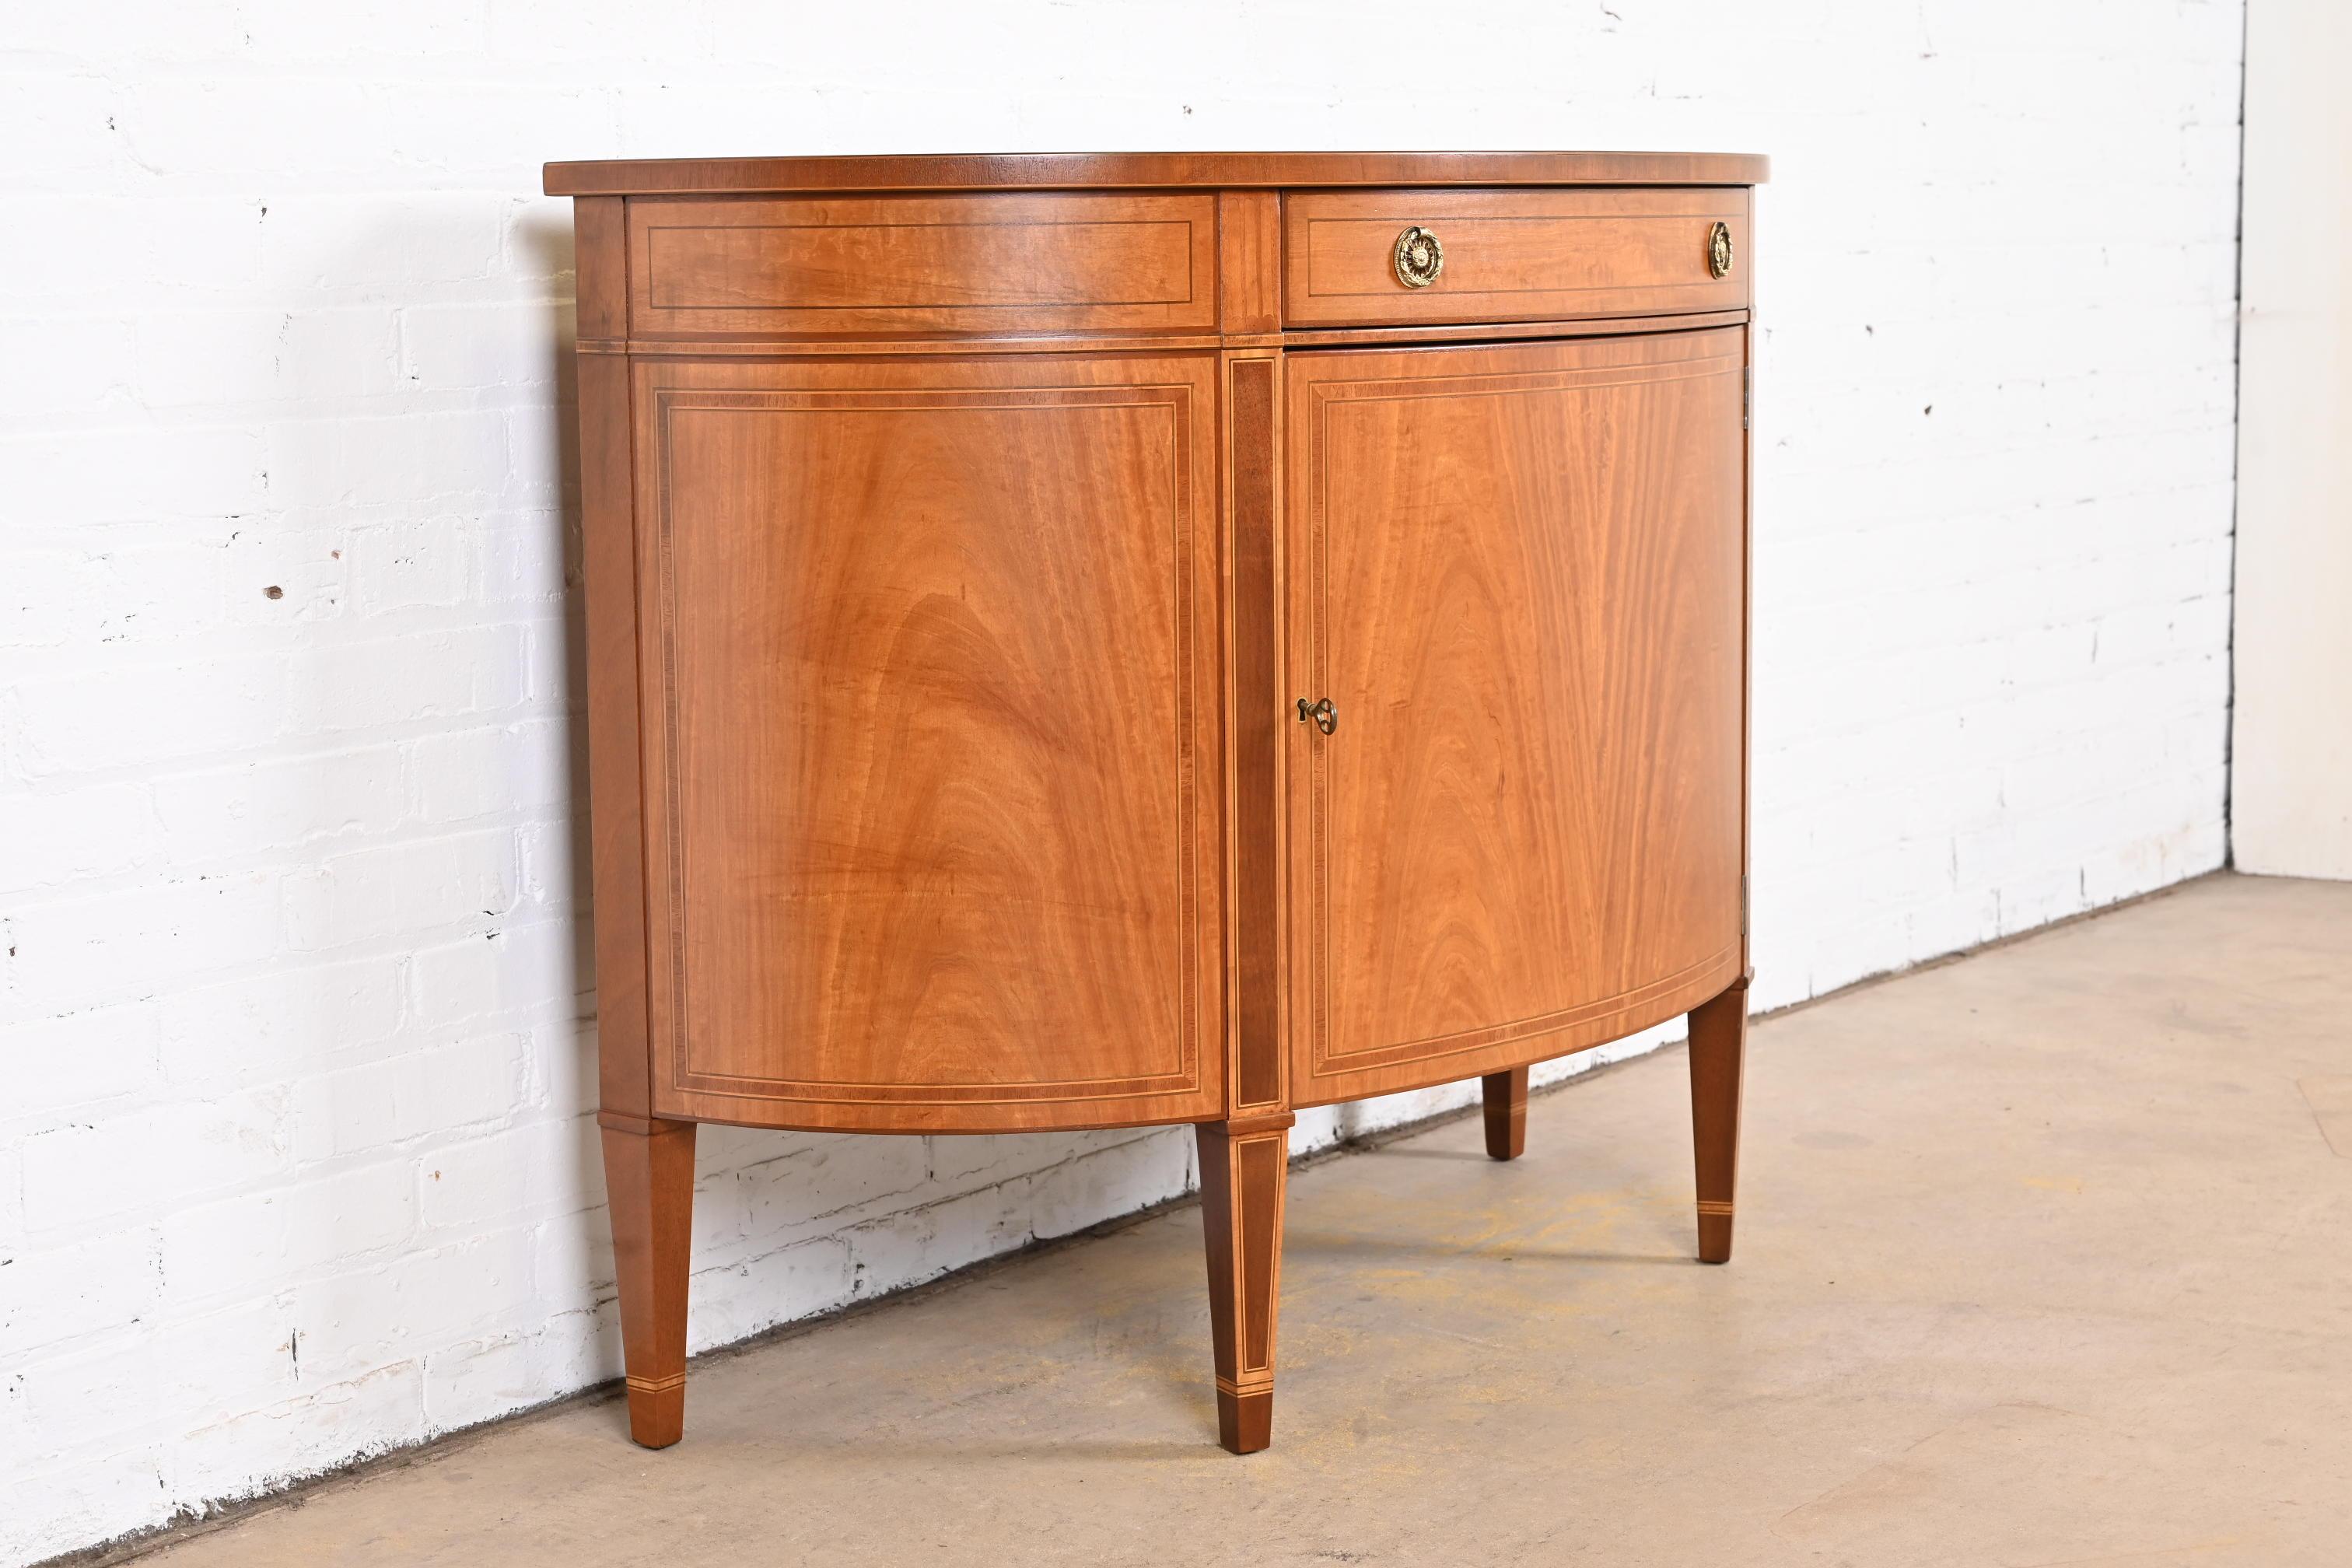 Baker Furniture Federal Mahogany and Satinwood Demilune Cabinet, Refinished 1